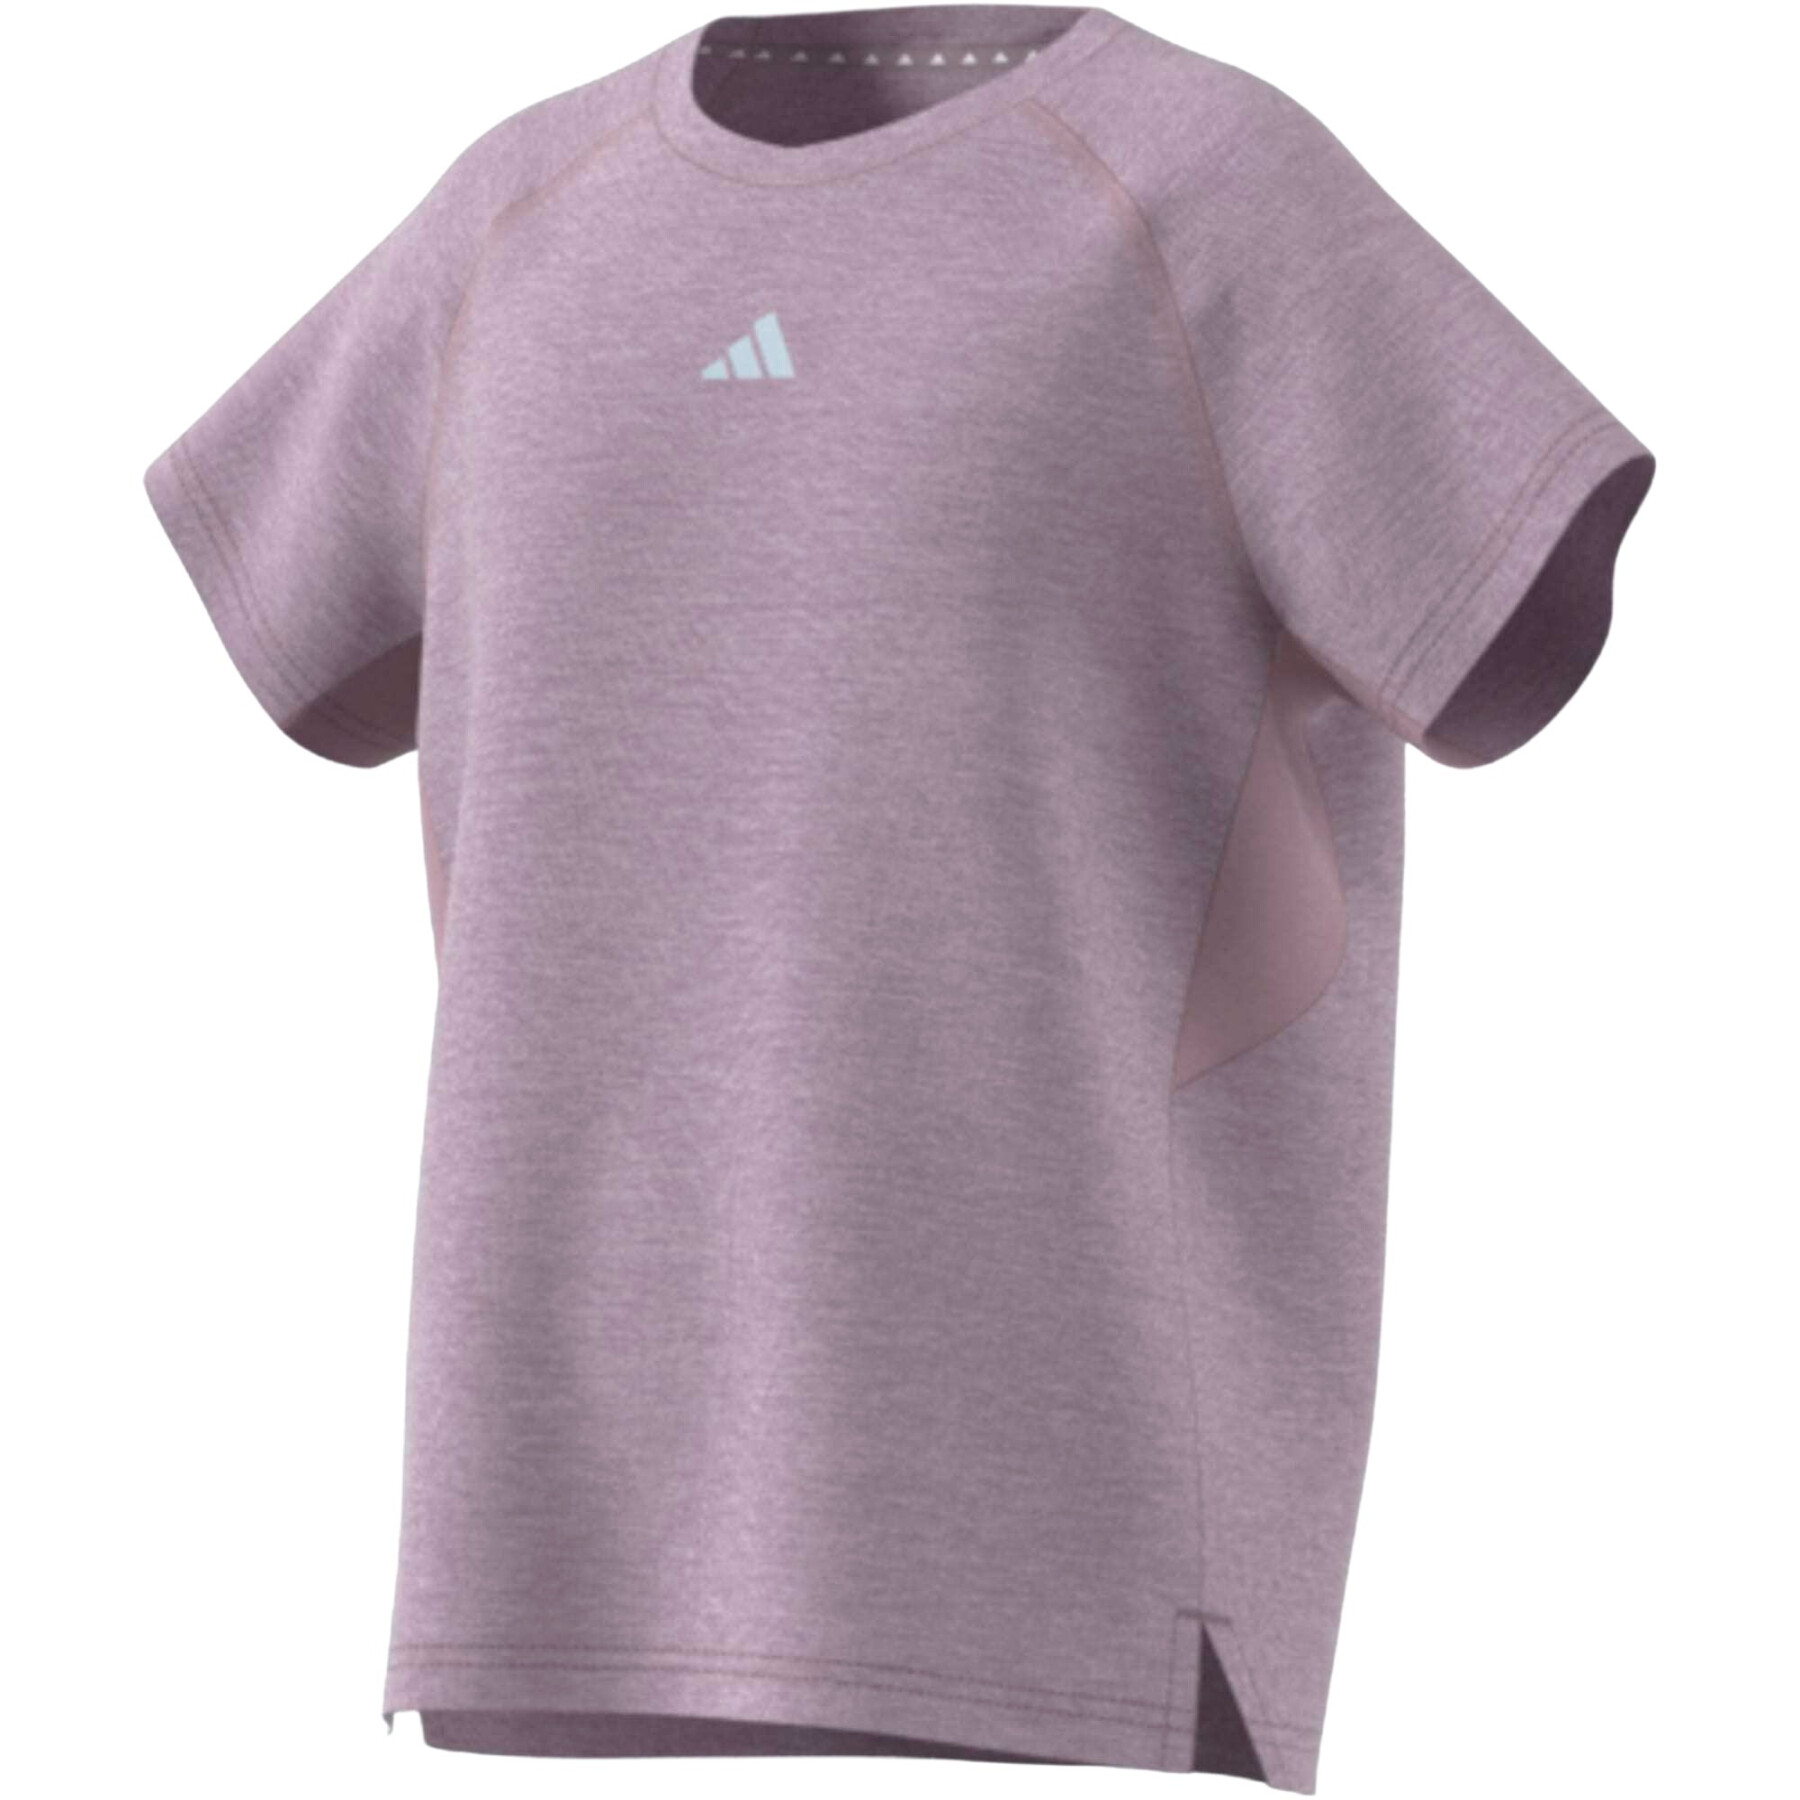 Maillot fille adidas